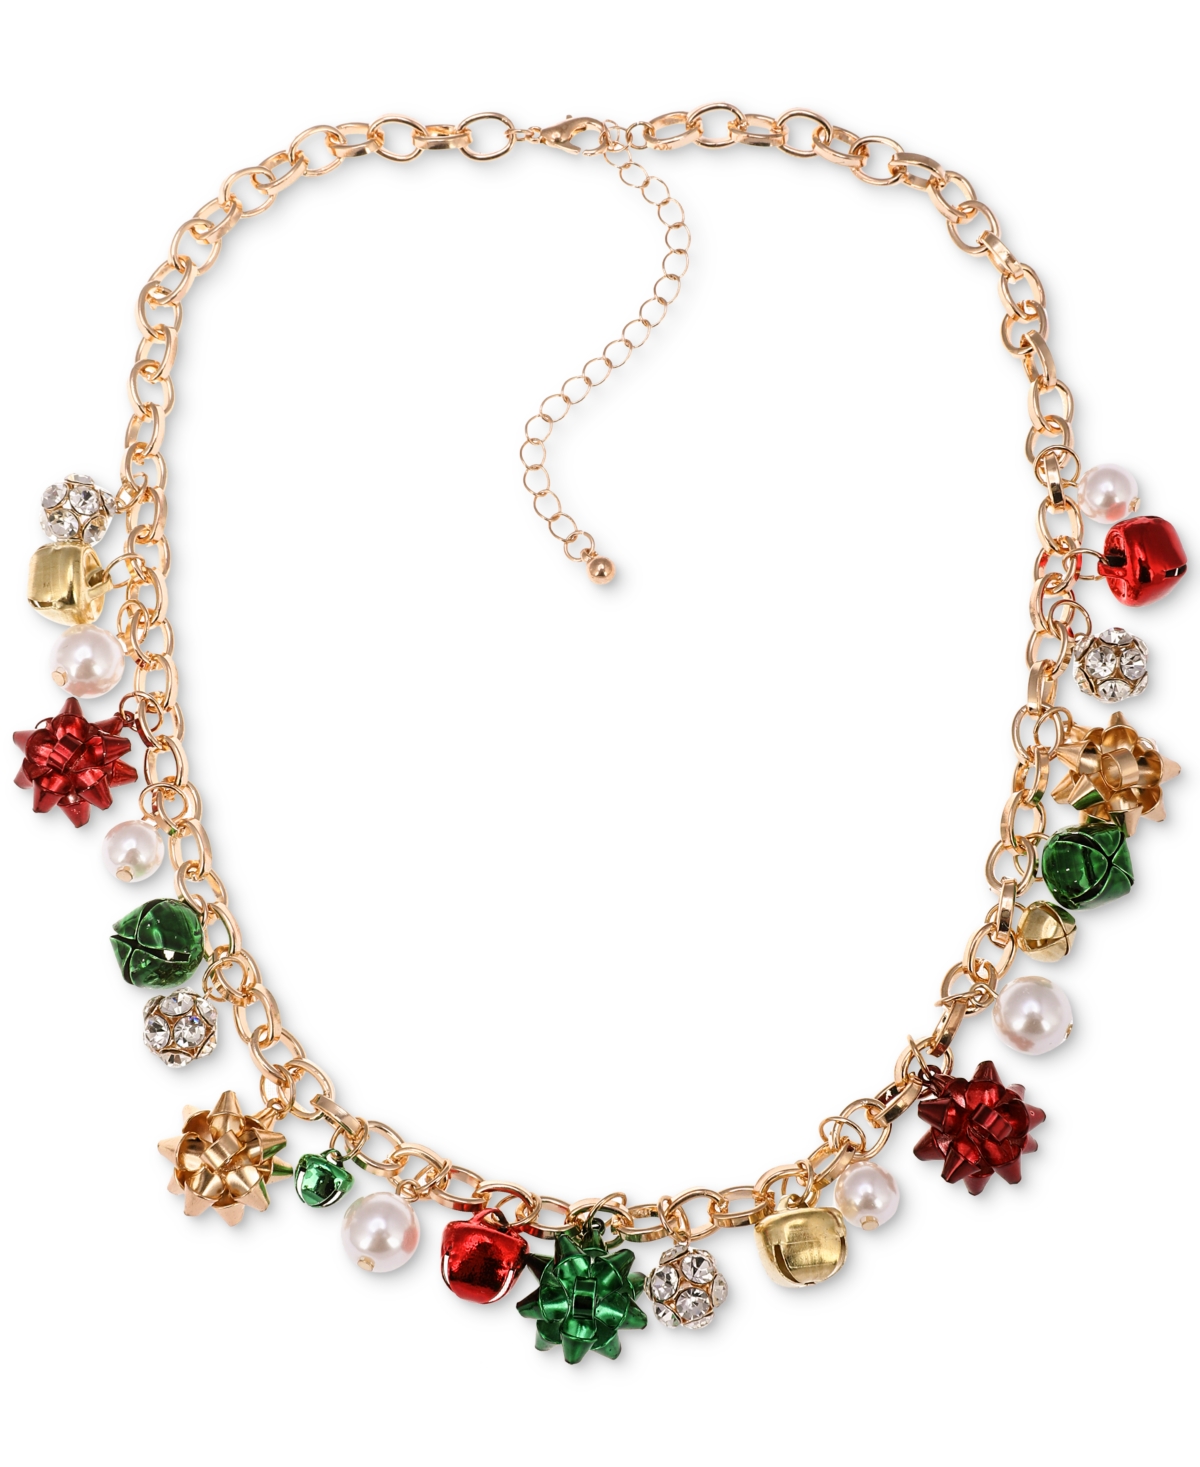 Gold-Tone Garland Statement Necklace, 18" + 3" extender, Created for Macy's - Multi